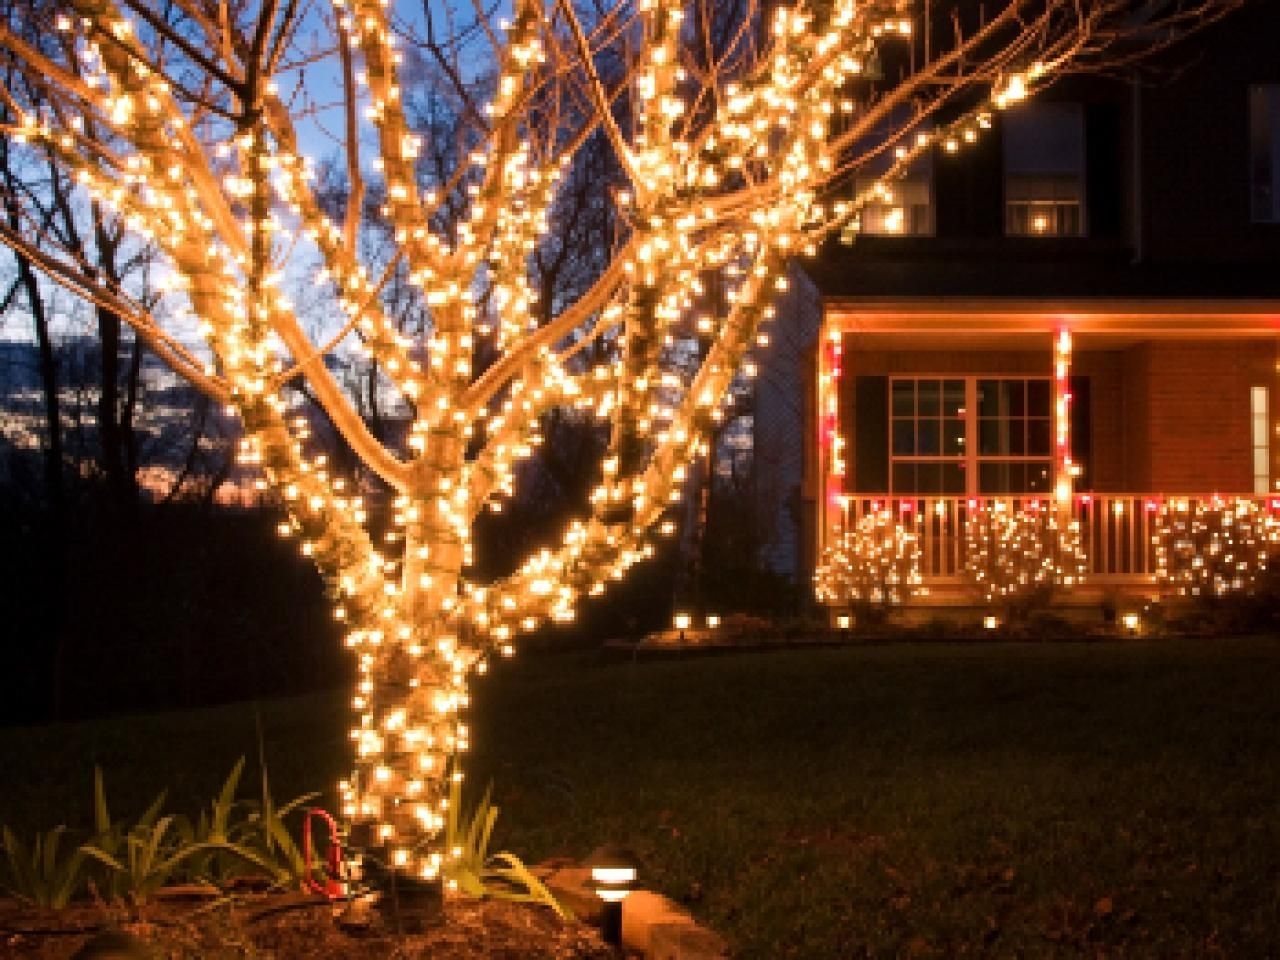 Buyers Guide For The Best Outdoor Christmas Lighting | Diy Throughout Hanging Lights In Outdoor Trees (View 3 of 15)